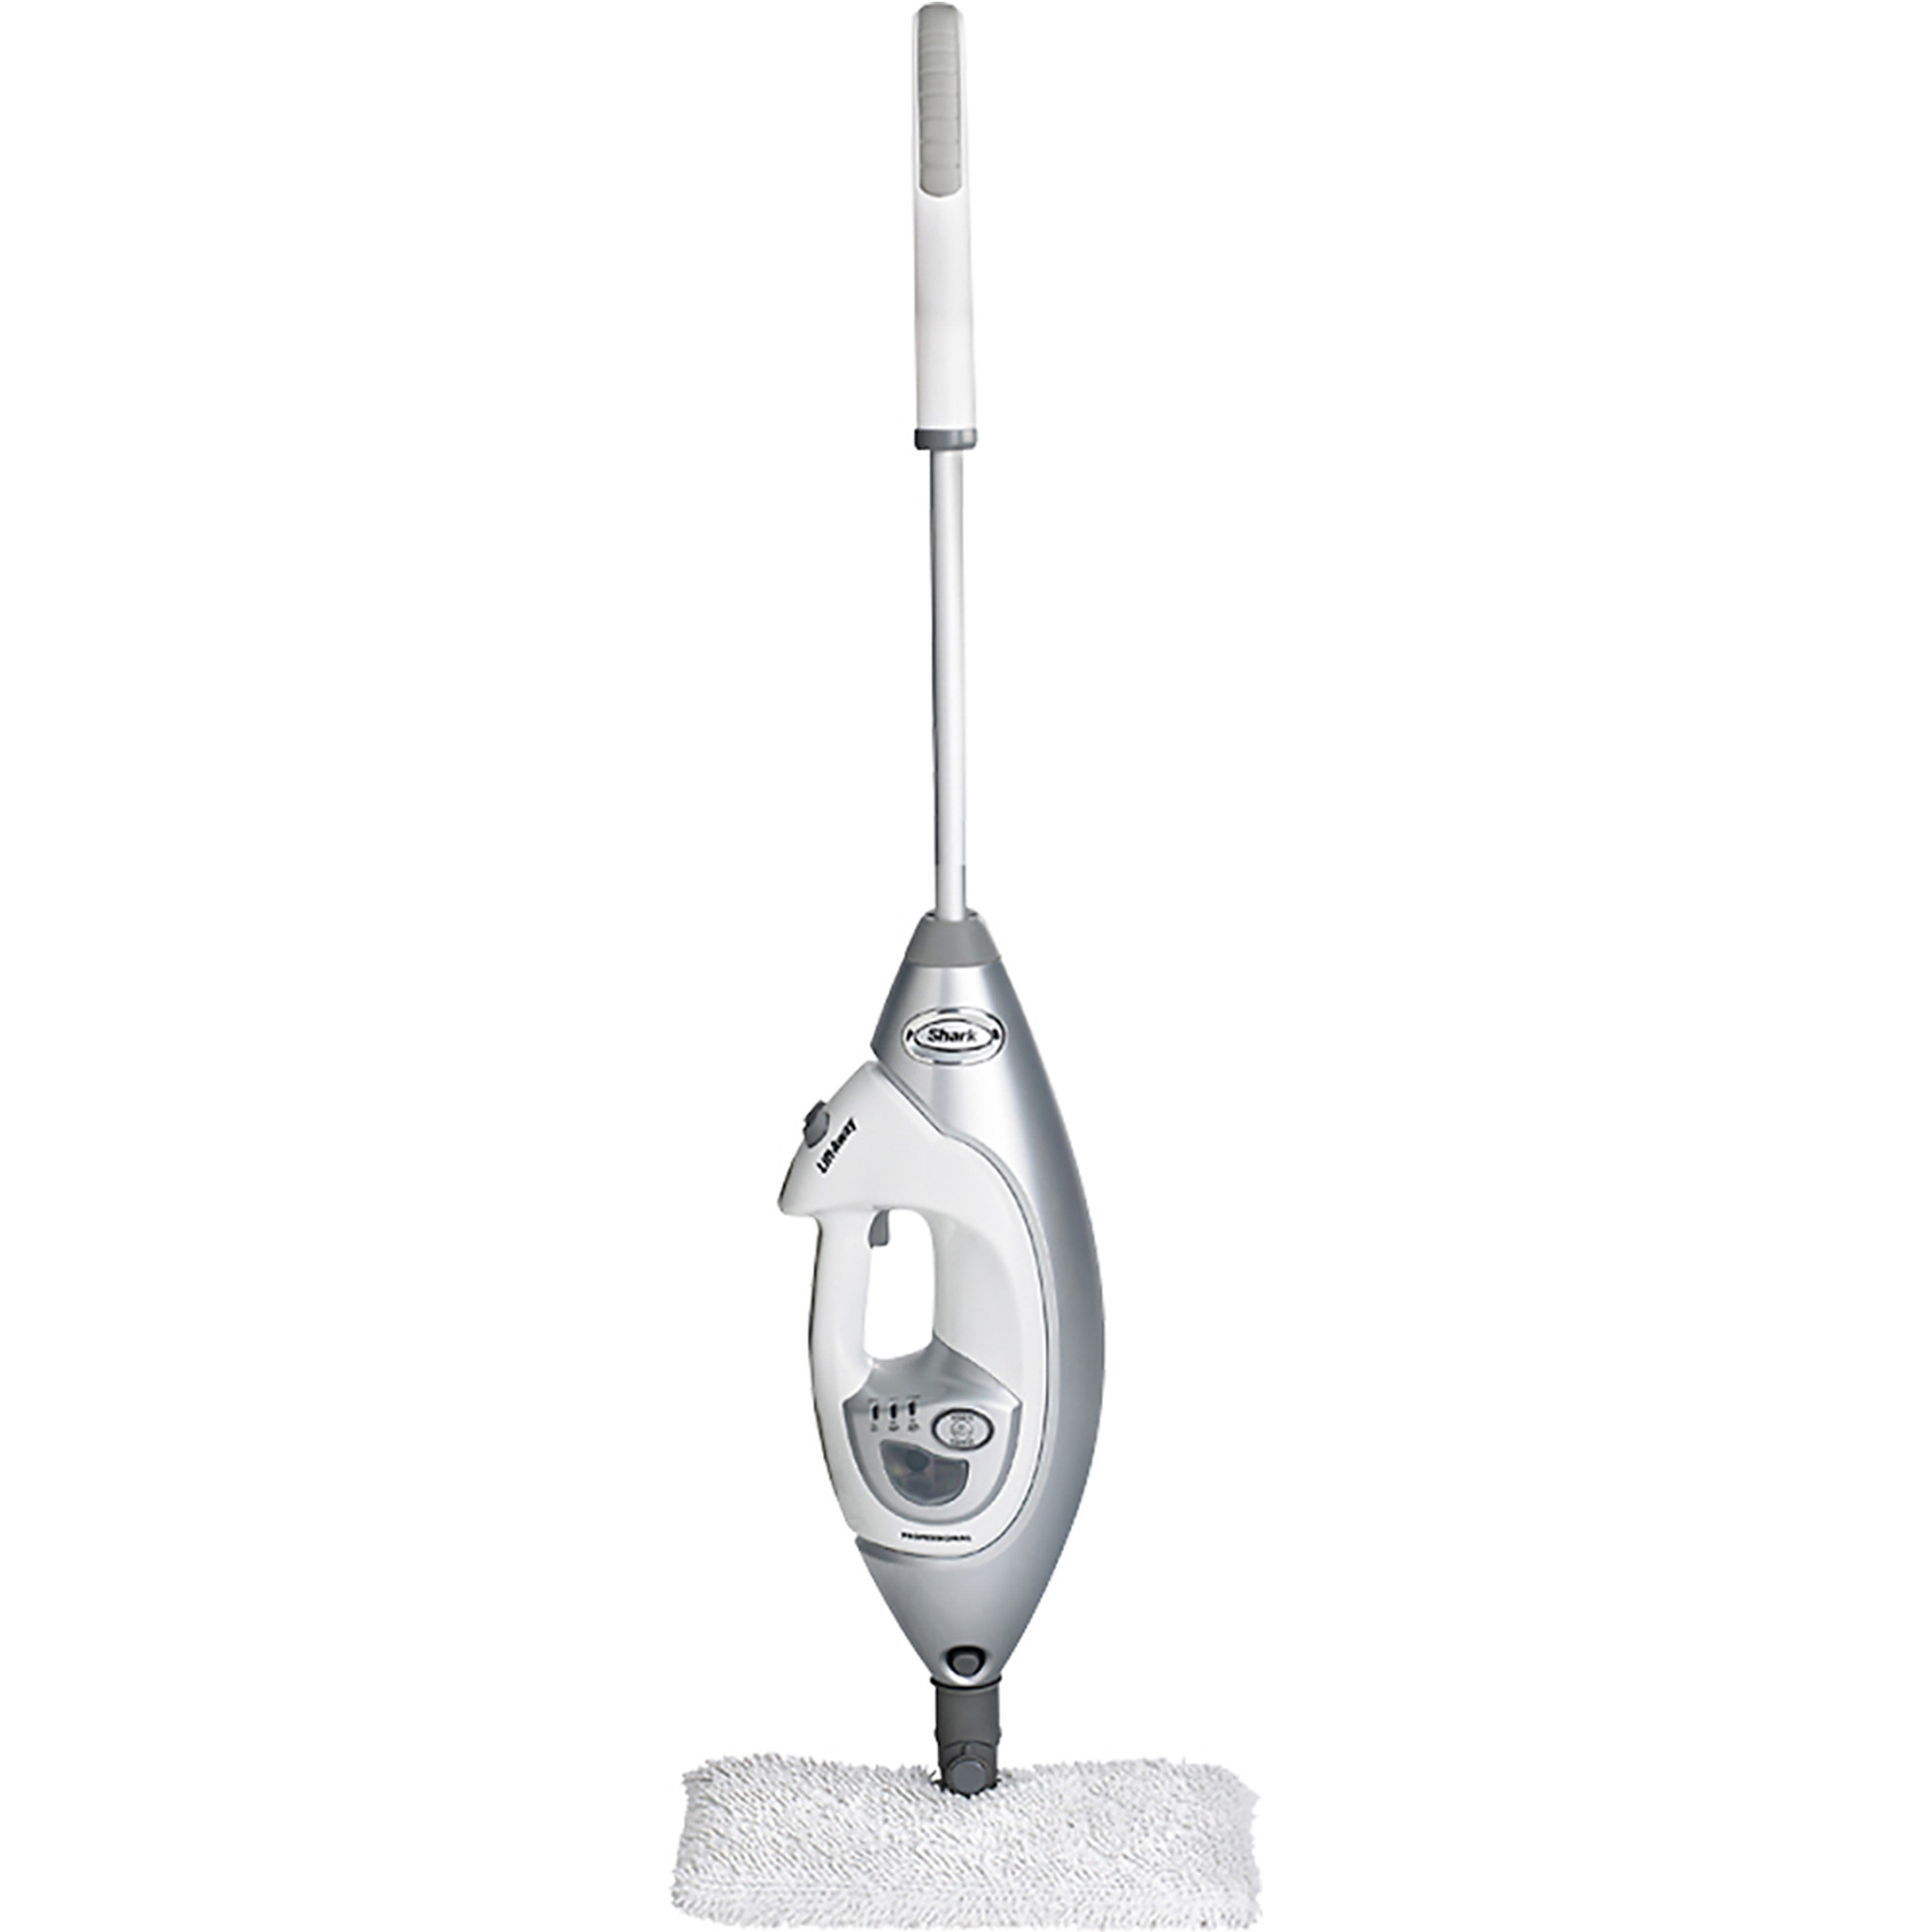 26,000+ Shoppers Swear by Shark's Steam Mop That Cleans Dirt 'Quickly,  Completely, and Effortlessly,' and It's on Sale